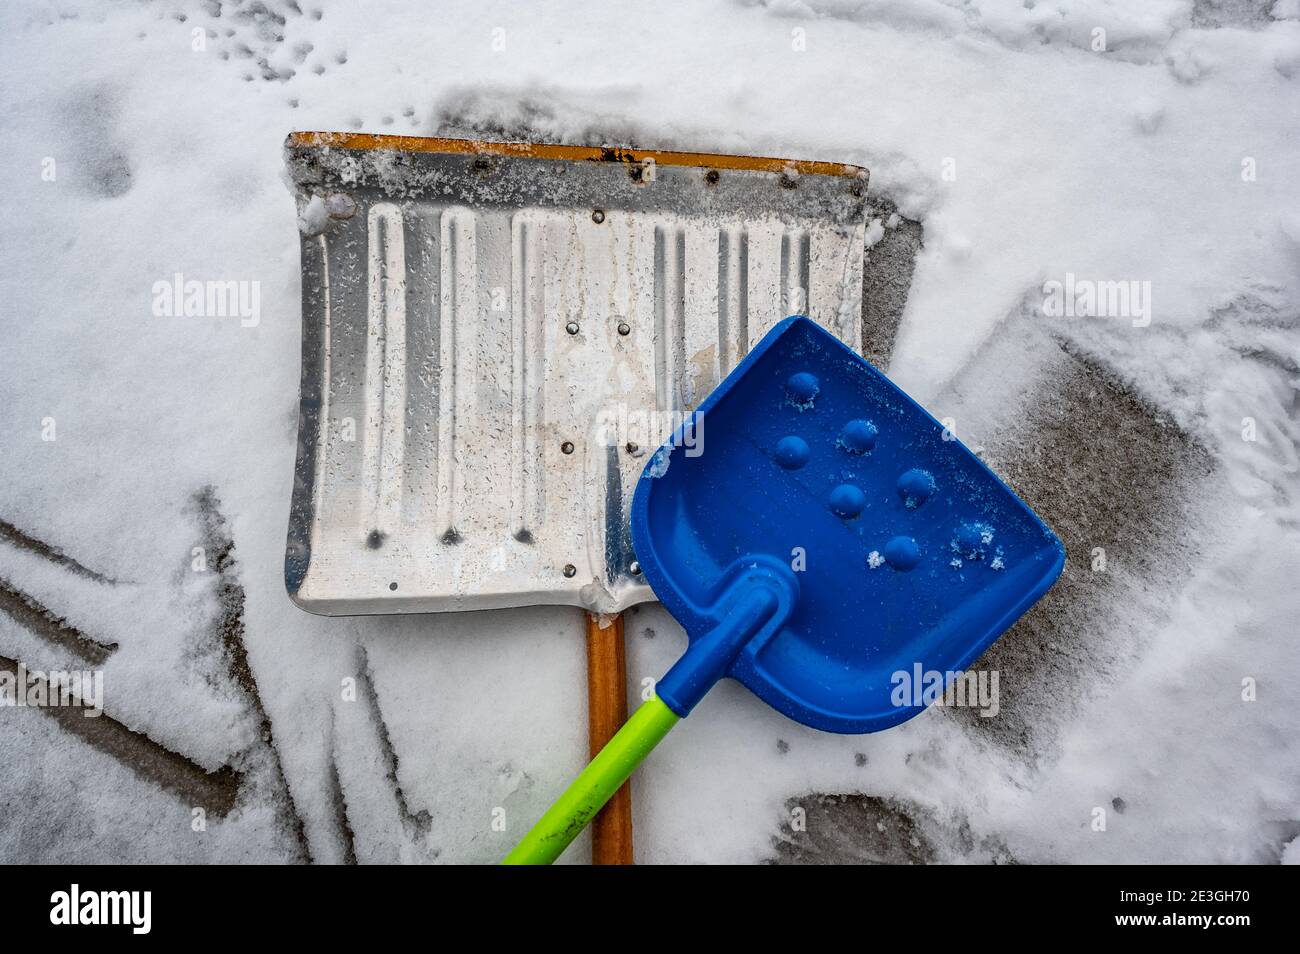 Adult metal shovel and child toy plastic shovel to imply working together to clear snow Stock Photo